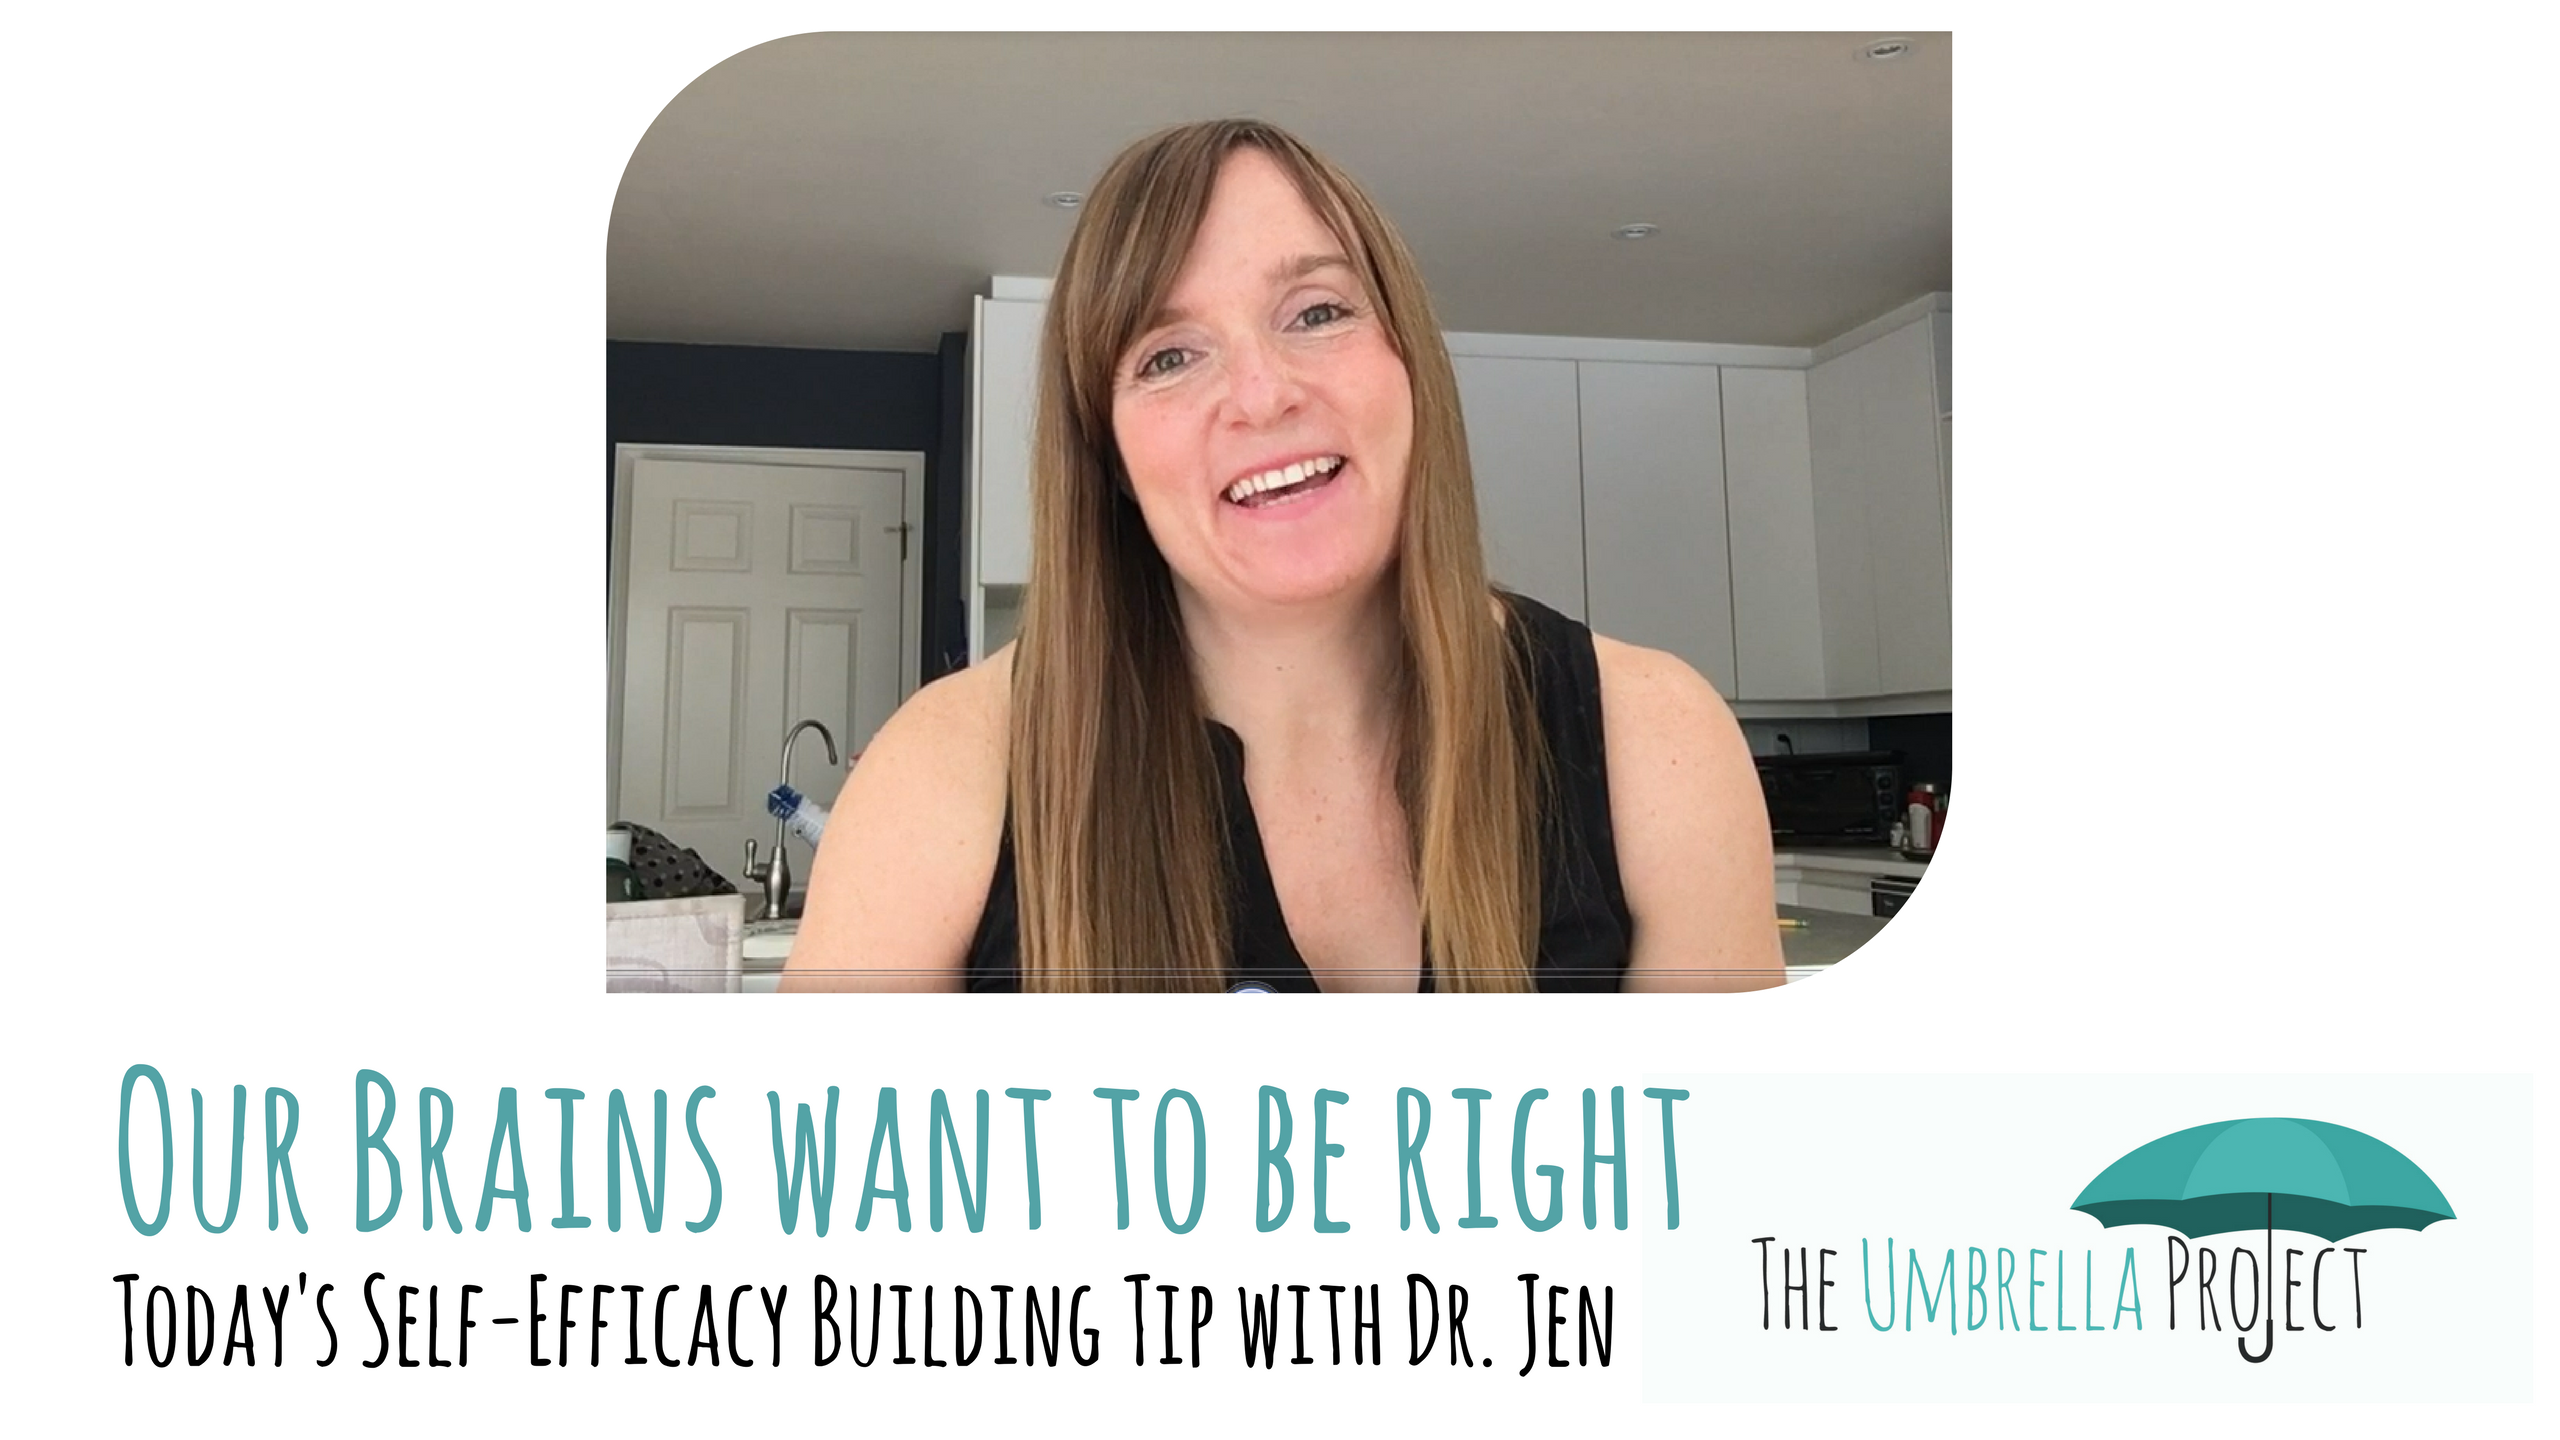 Our Brains Want to be Right: Today’s Self-Efficacy Building Tip with Dr. Jen